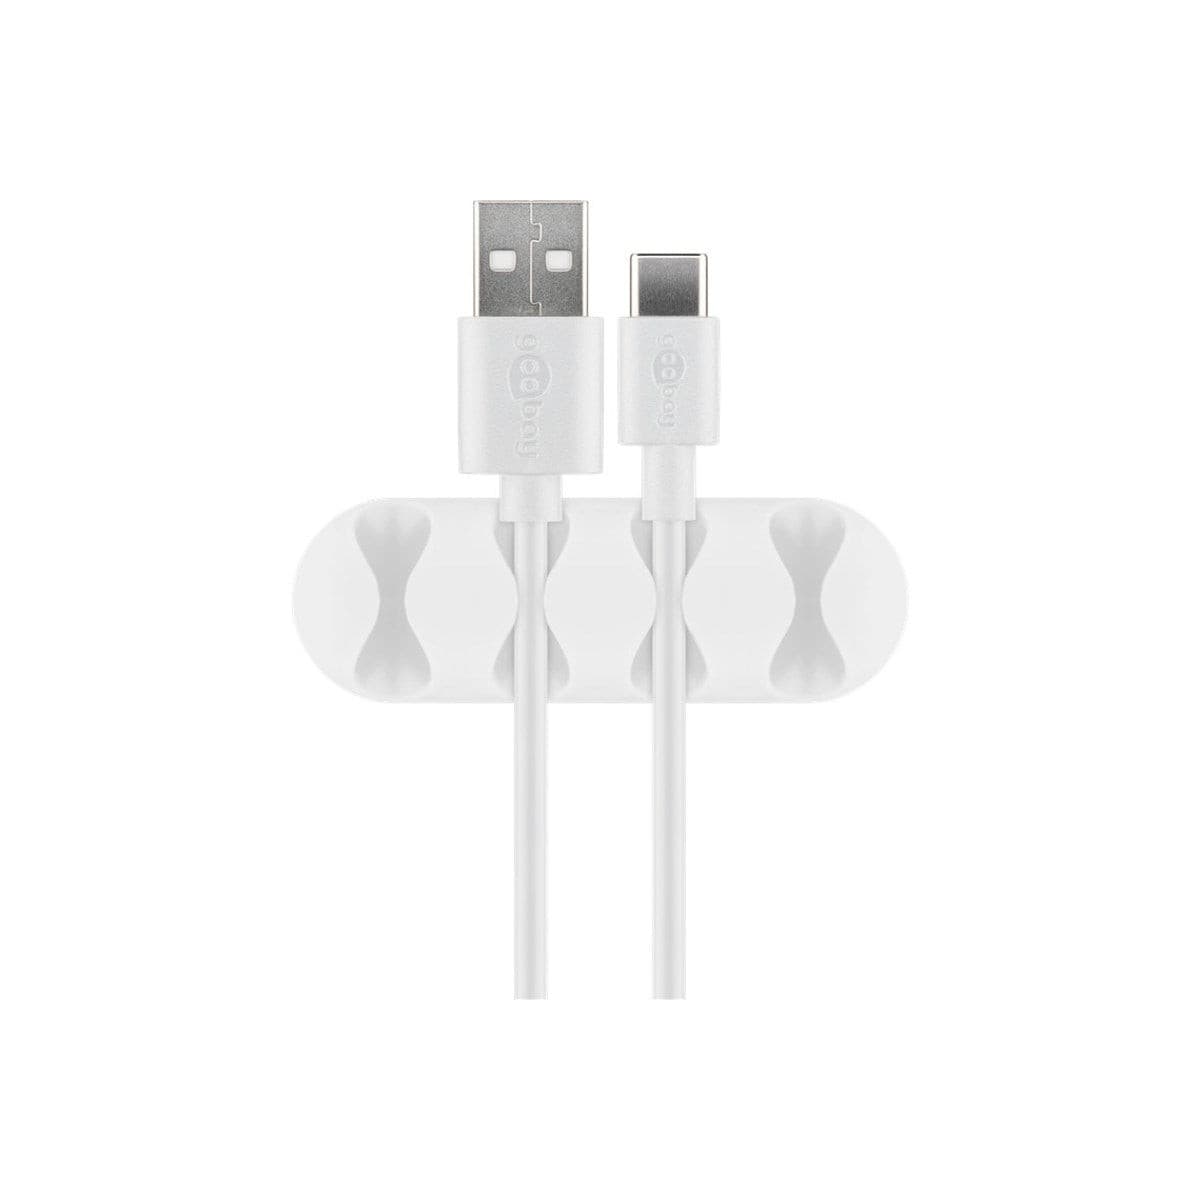 Goobay Cable Management 4 Slots, 2 piece set in white.